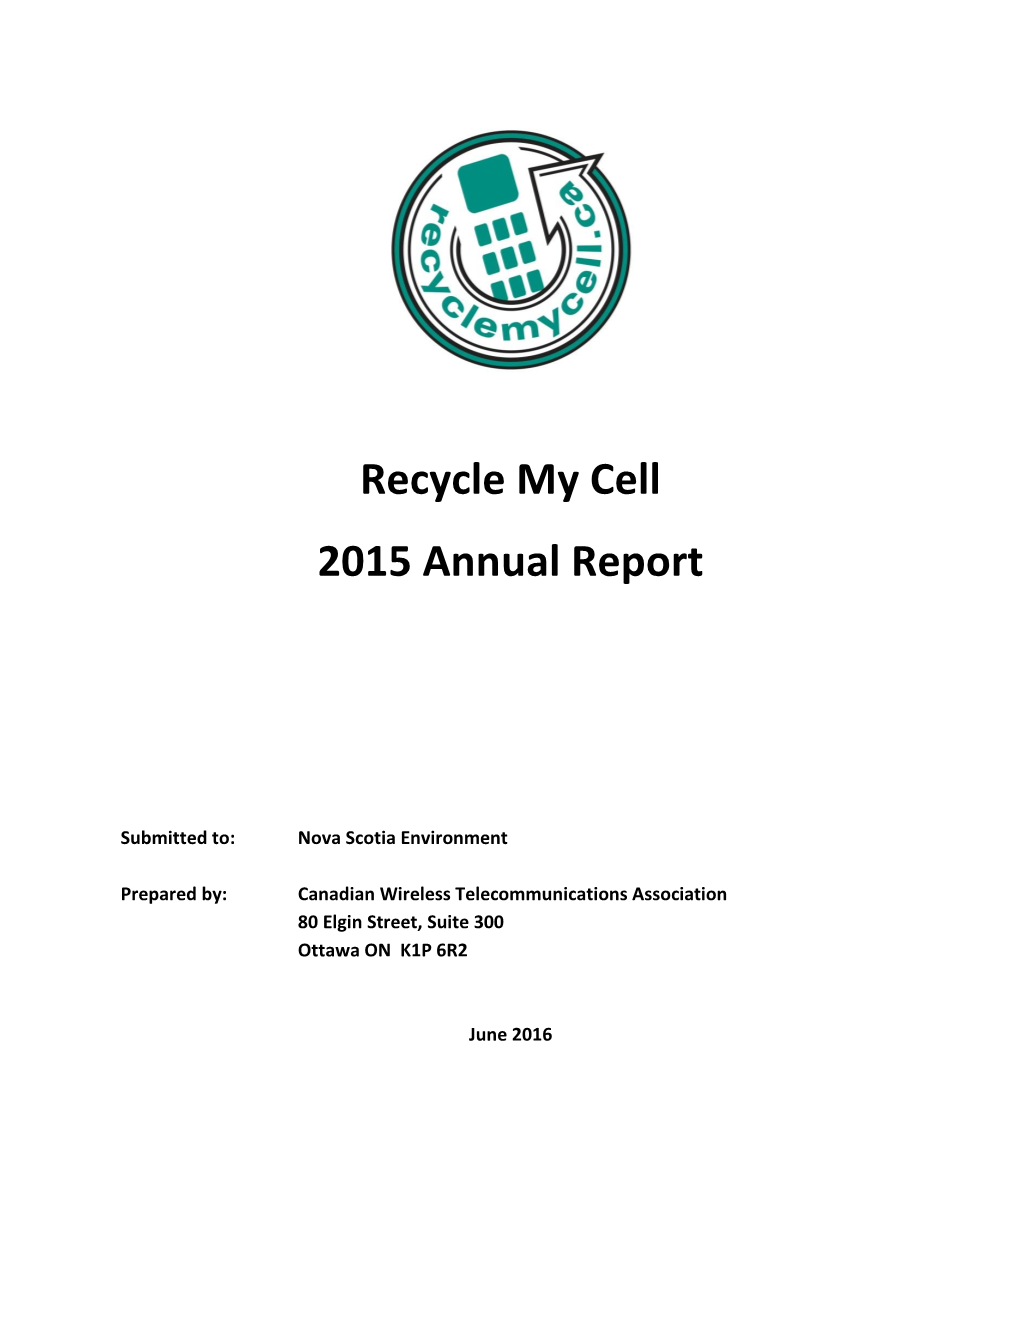 Recycle My Cell 2015 Annual Report